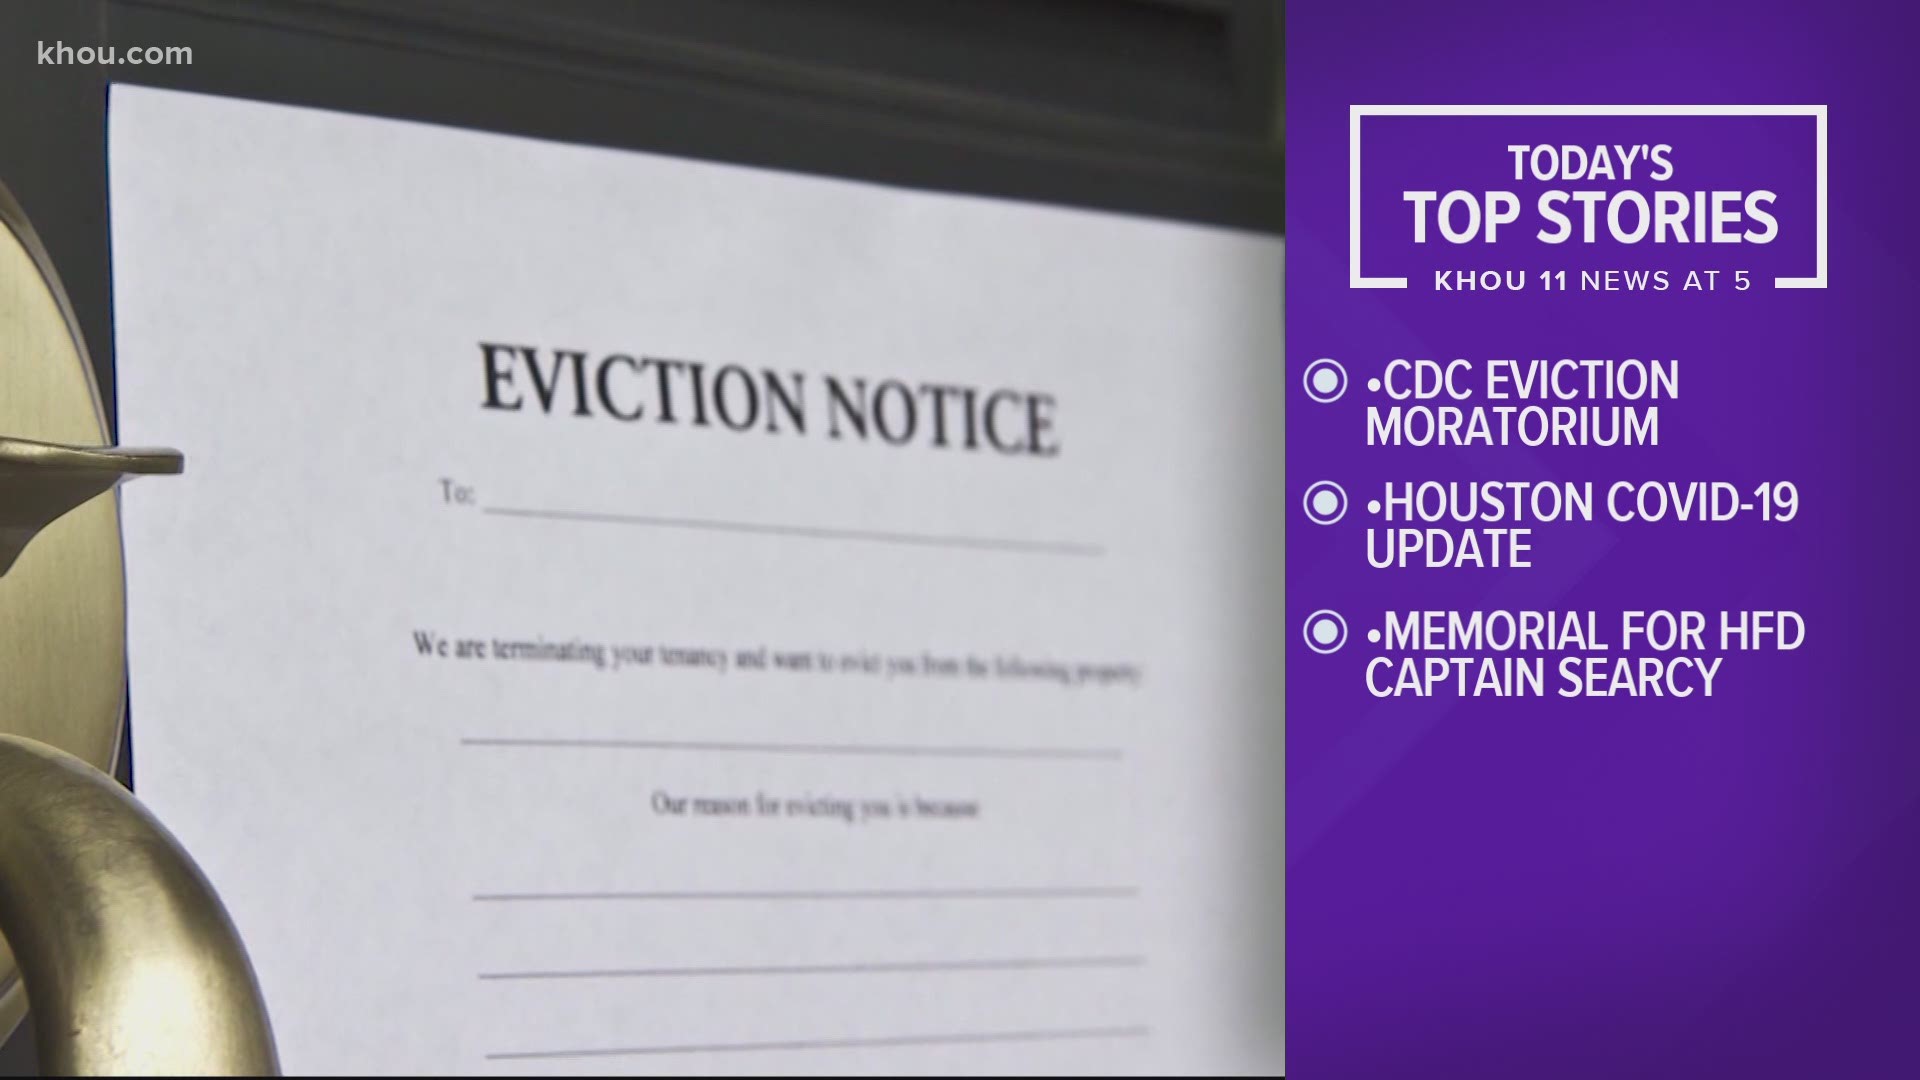 According to January Advisors, 97 eviction cases were filed on Tuesday and 142 on Monday.